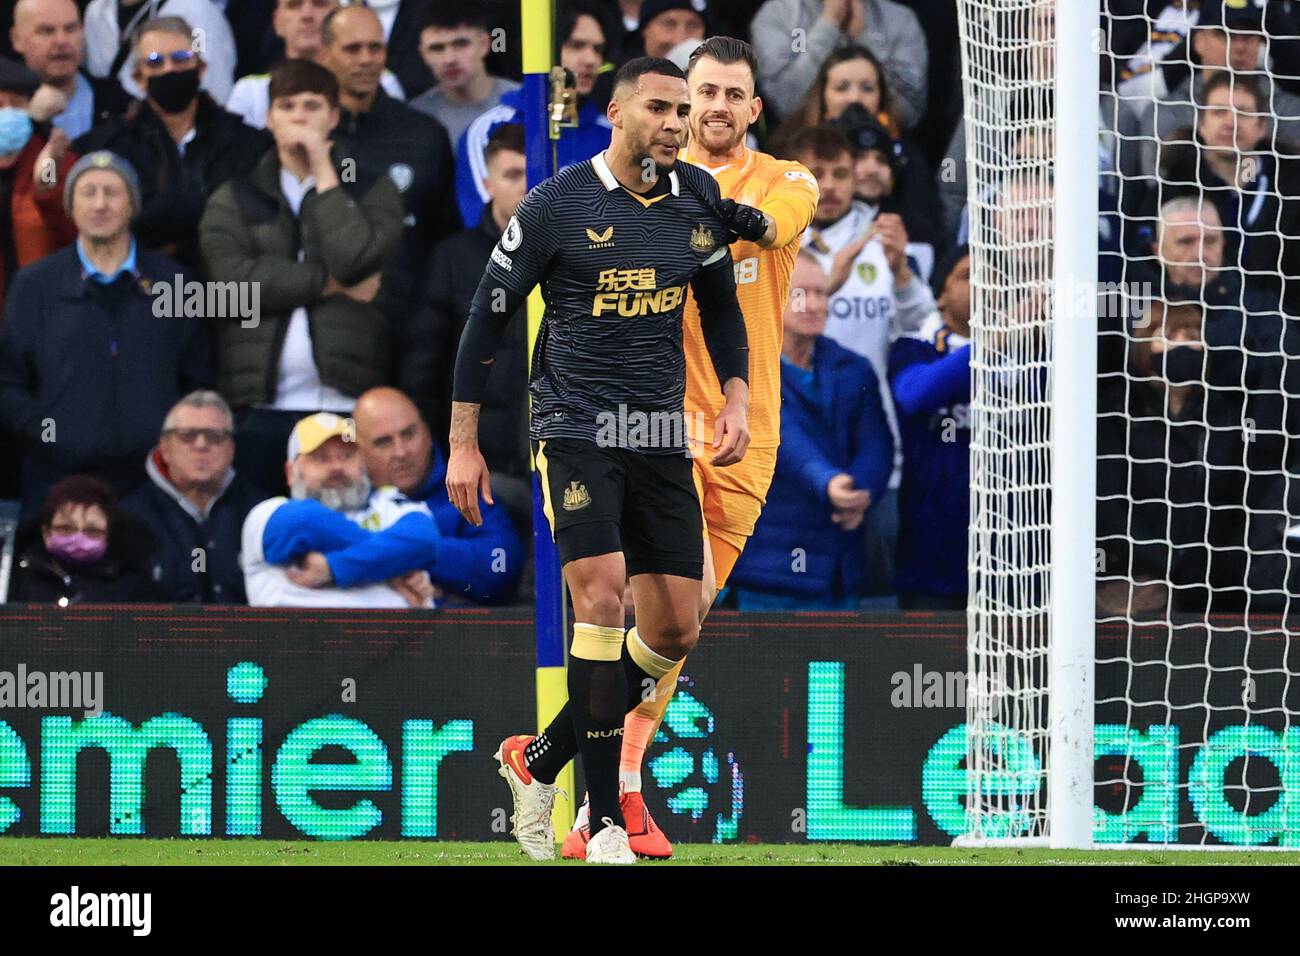 Leeds, UK. 22nd Jan, 2022. Martin Dubravka #1 of Newcastle United congratulates Jamaal Lascelles #6 of Newcastle United for his defensive block during the Premier League fixture Leeds United vs Newcastle United at Elland Road, Leeds, UK, 22nd January 2022 Credit: News Images /Alamy Live News Stock Photo